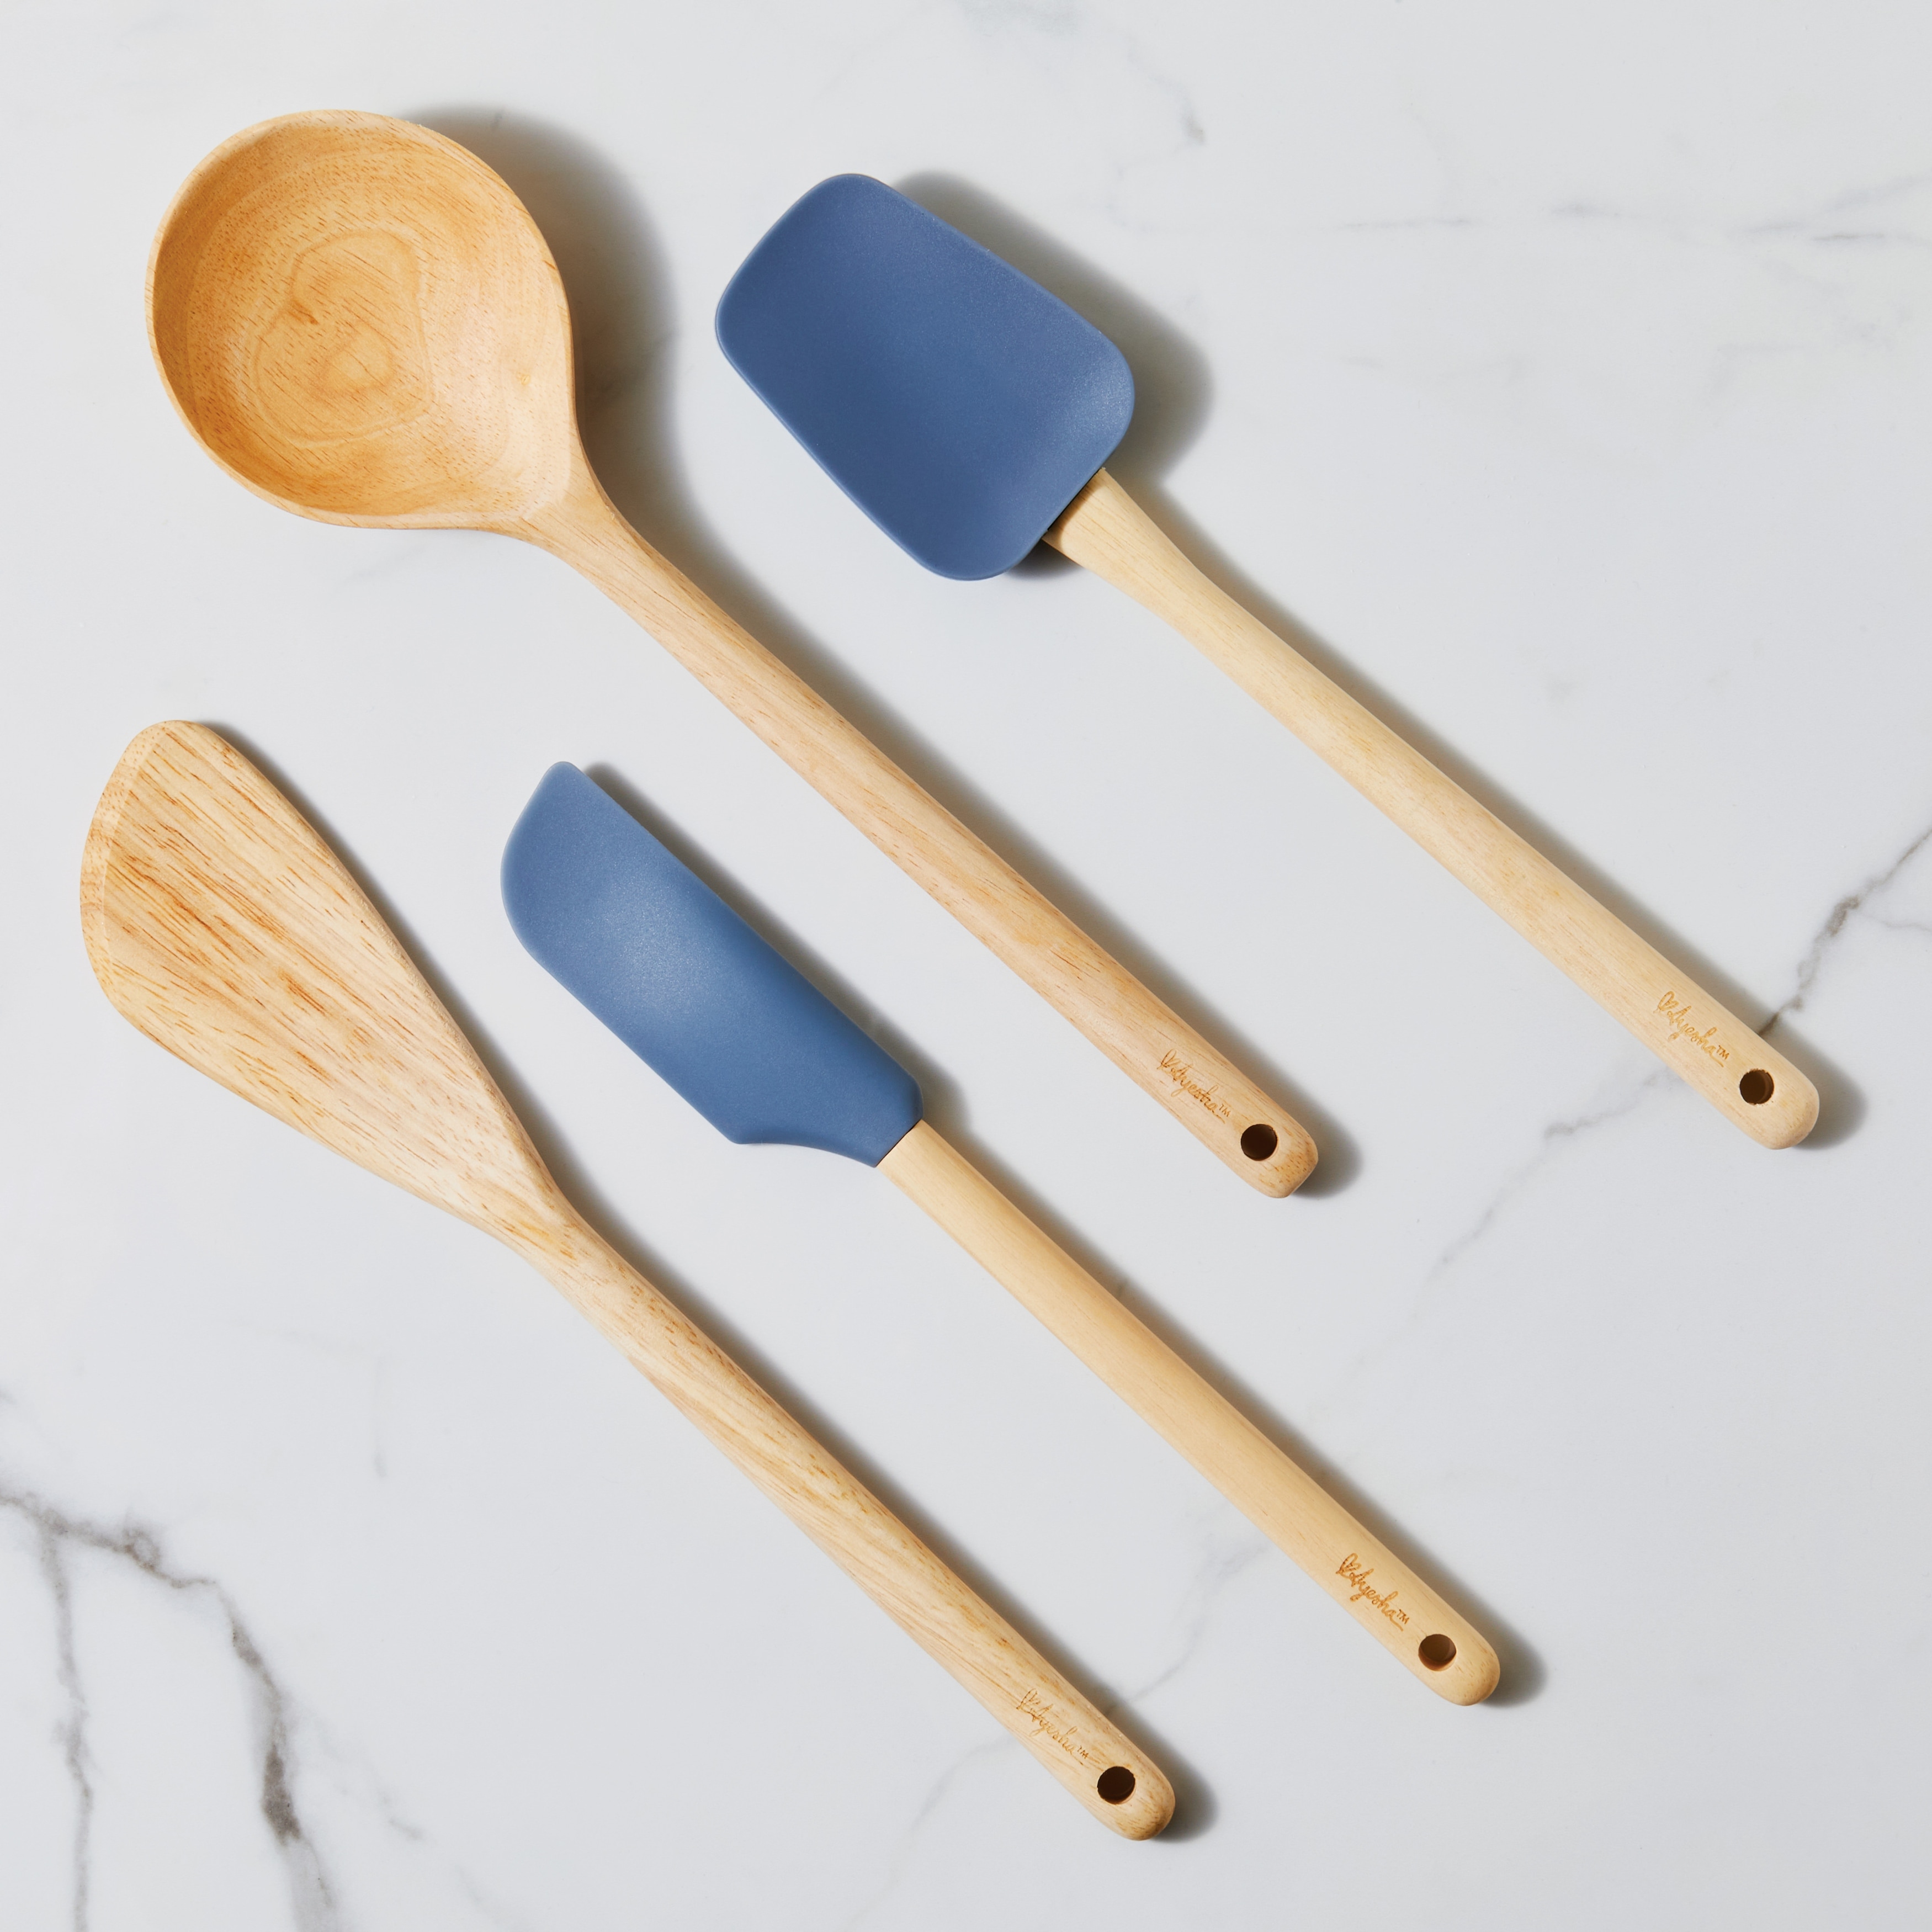 https://ak1.ostkcdn.com/images/products/is/images/direct/87a372aa289b1e84cd6825ac3f7e56a54af34af2/Ayesha-Curry-Tools-and-Gadgets-Cooking-Utensil-Set%2C-4pc.jpg